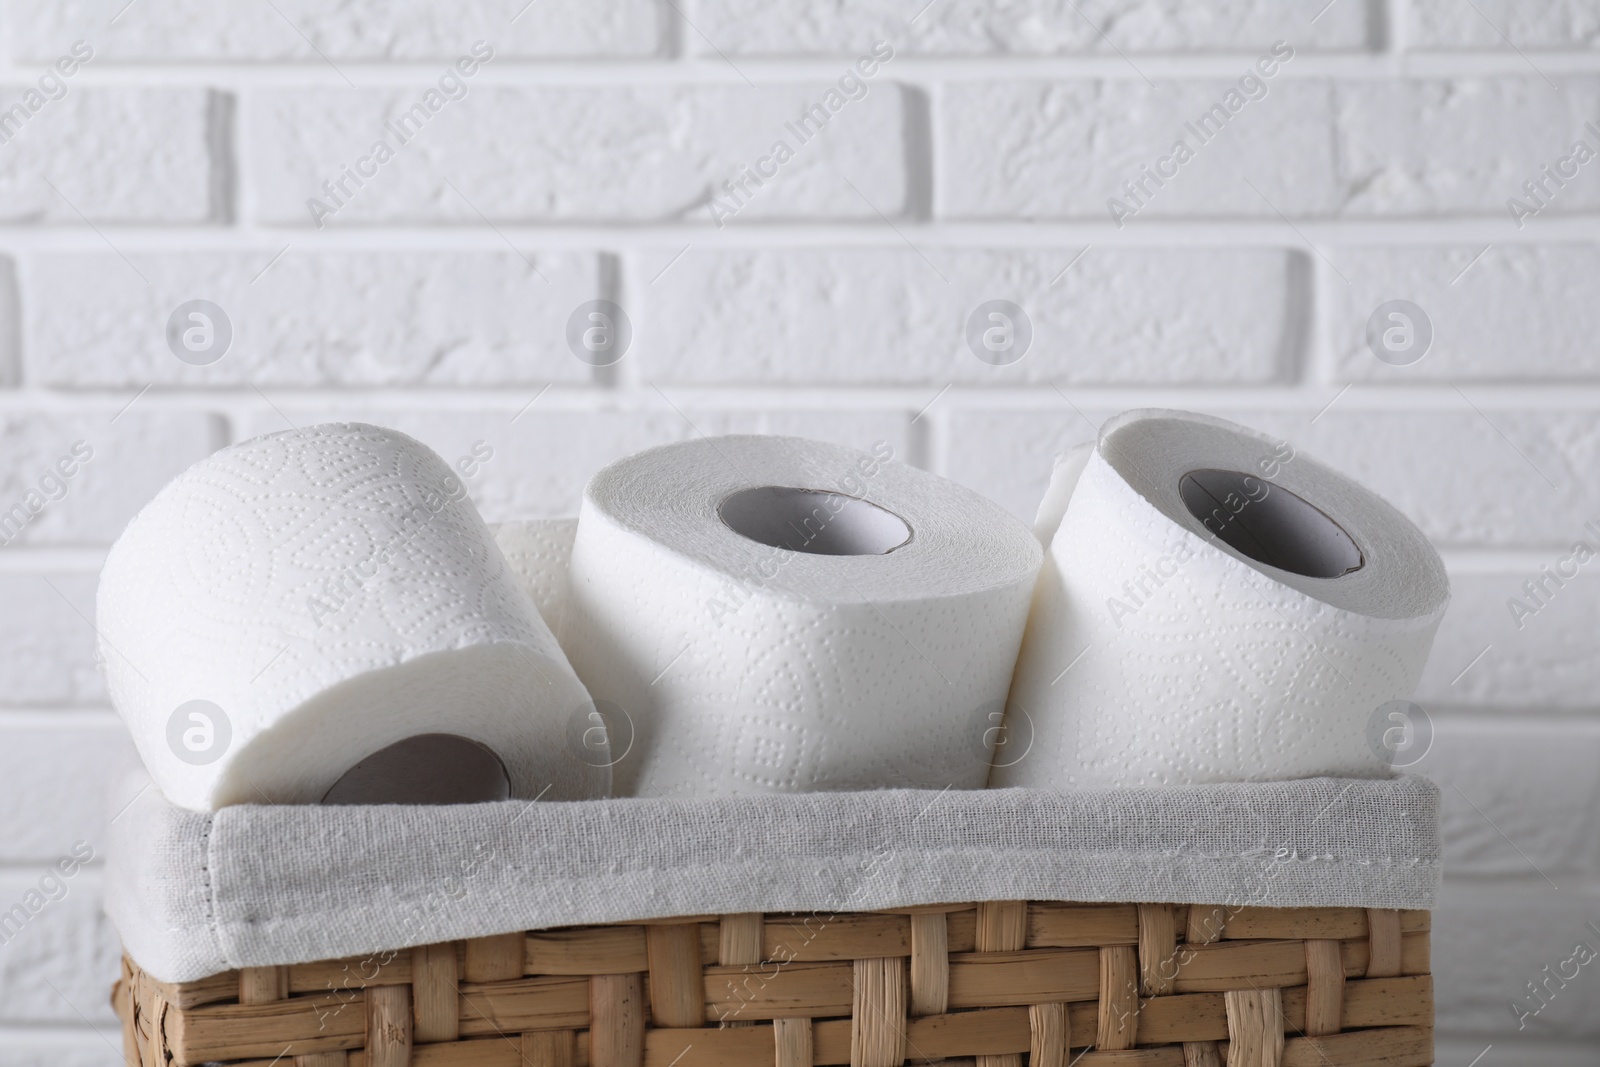 Photo of Toilet paper rolls in wicker basket against white brick wall